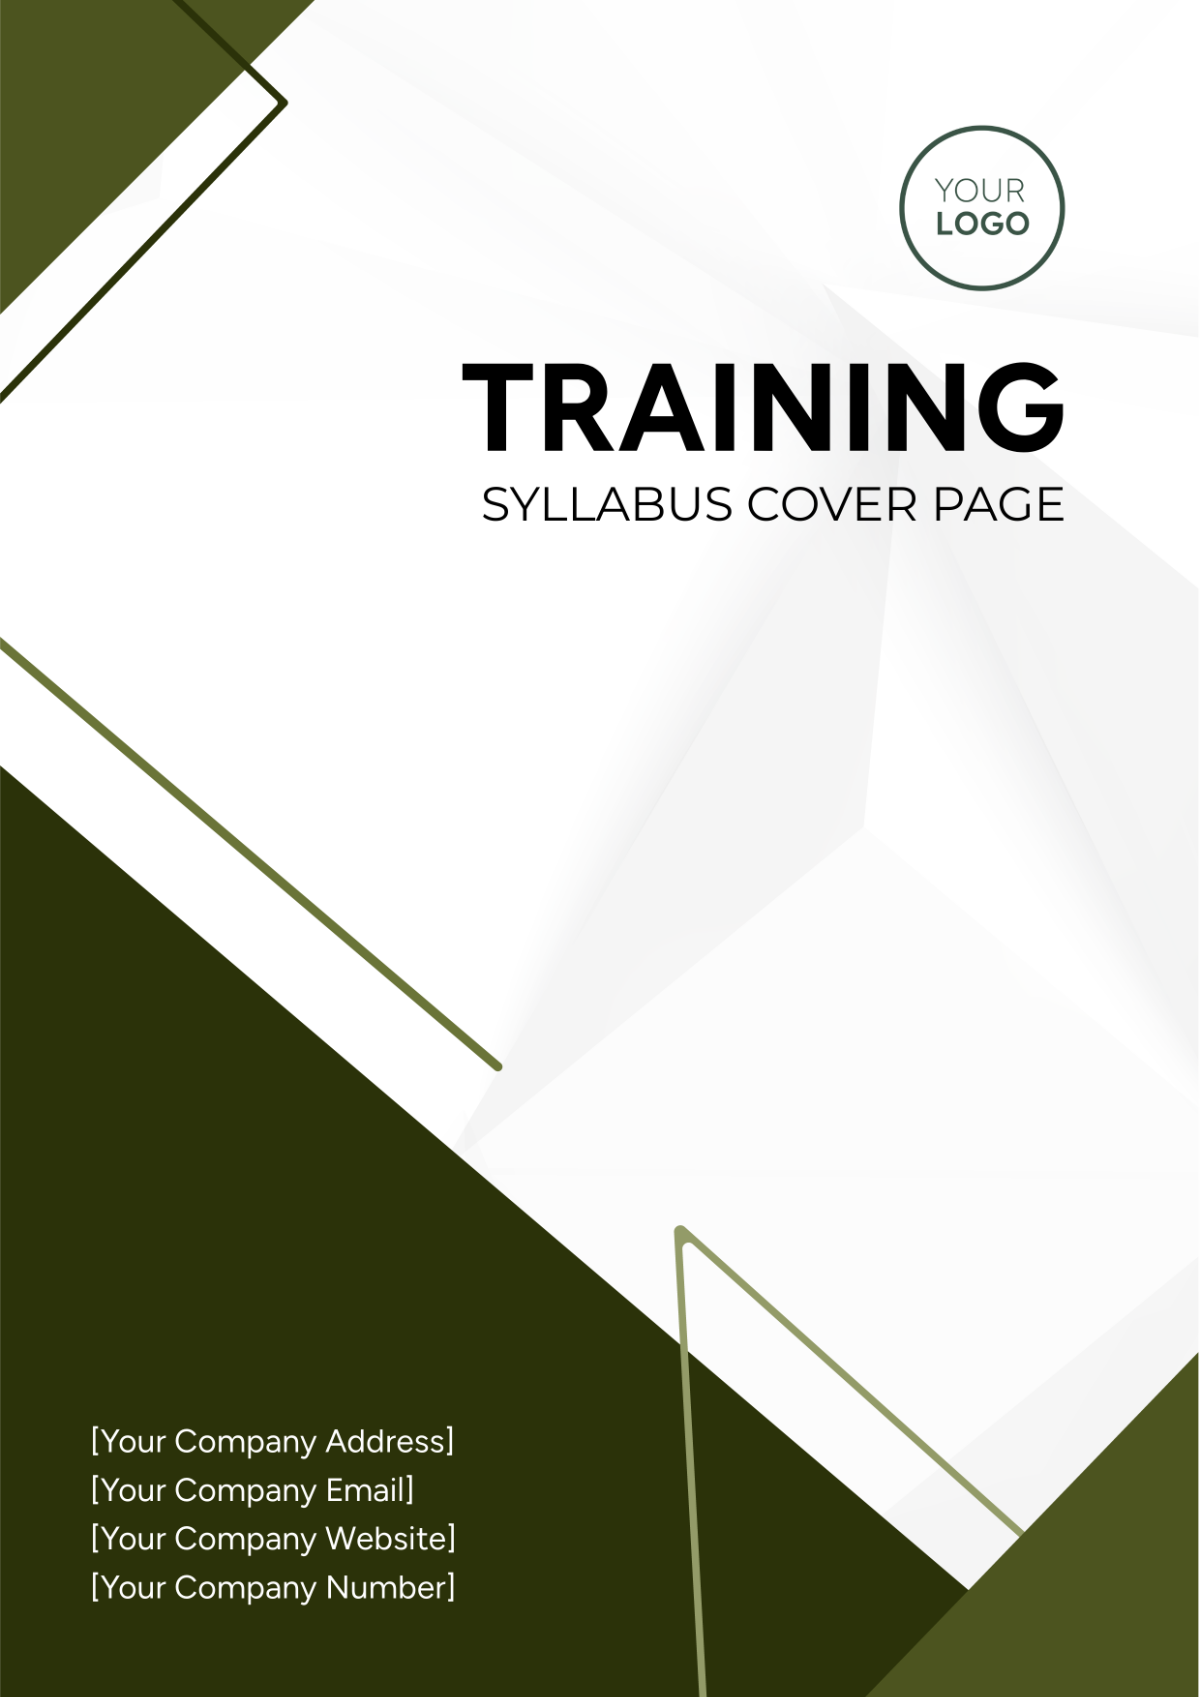 Training Syllabus Cover Page